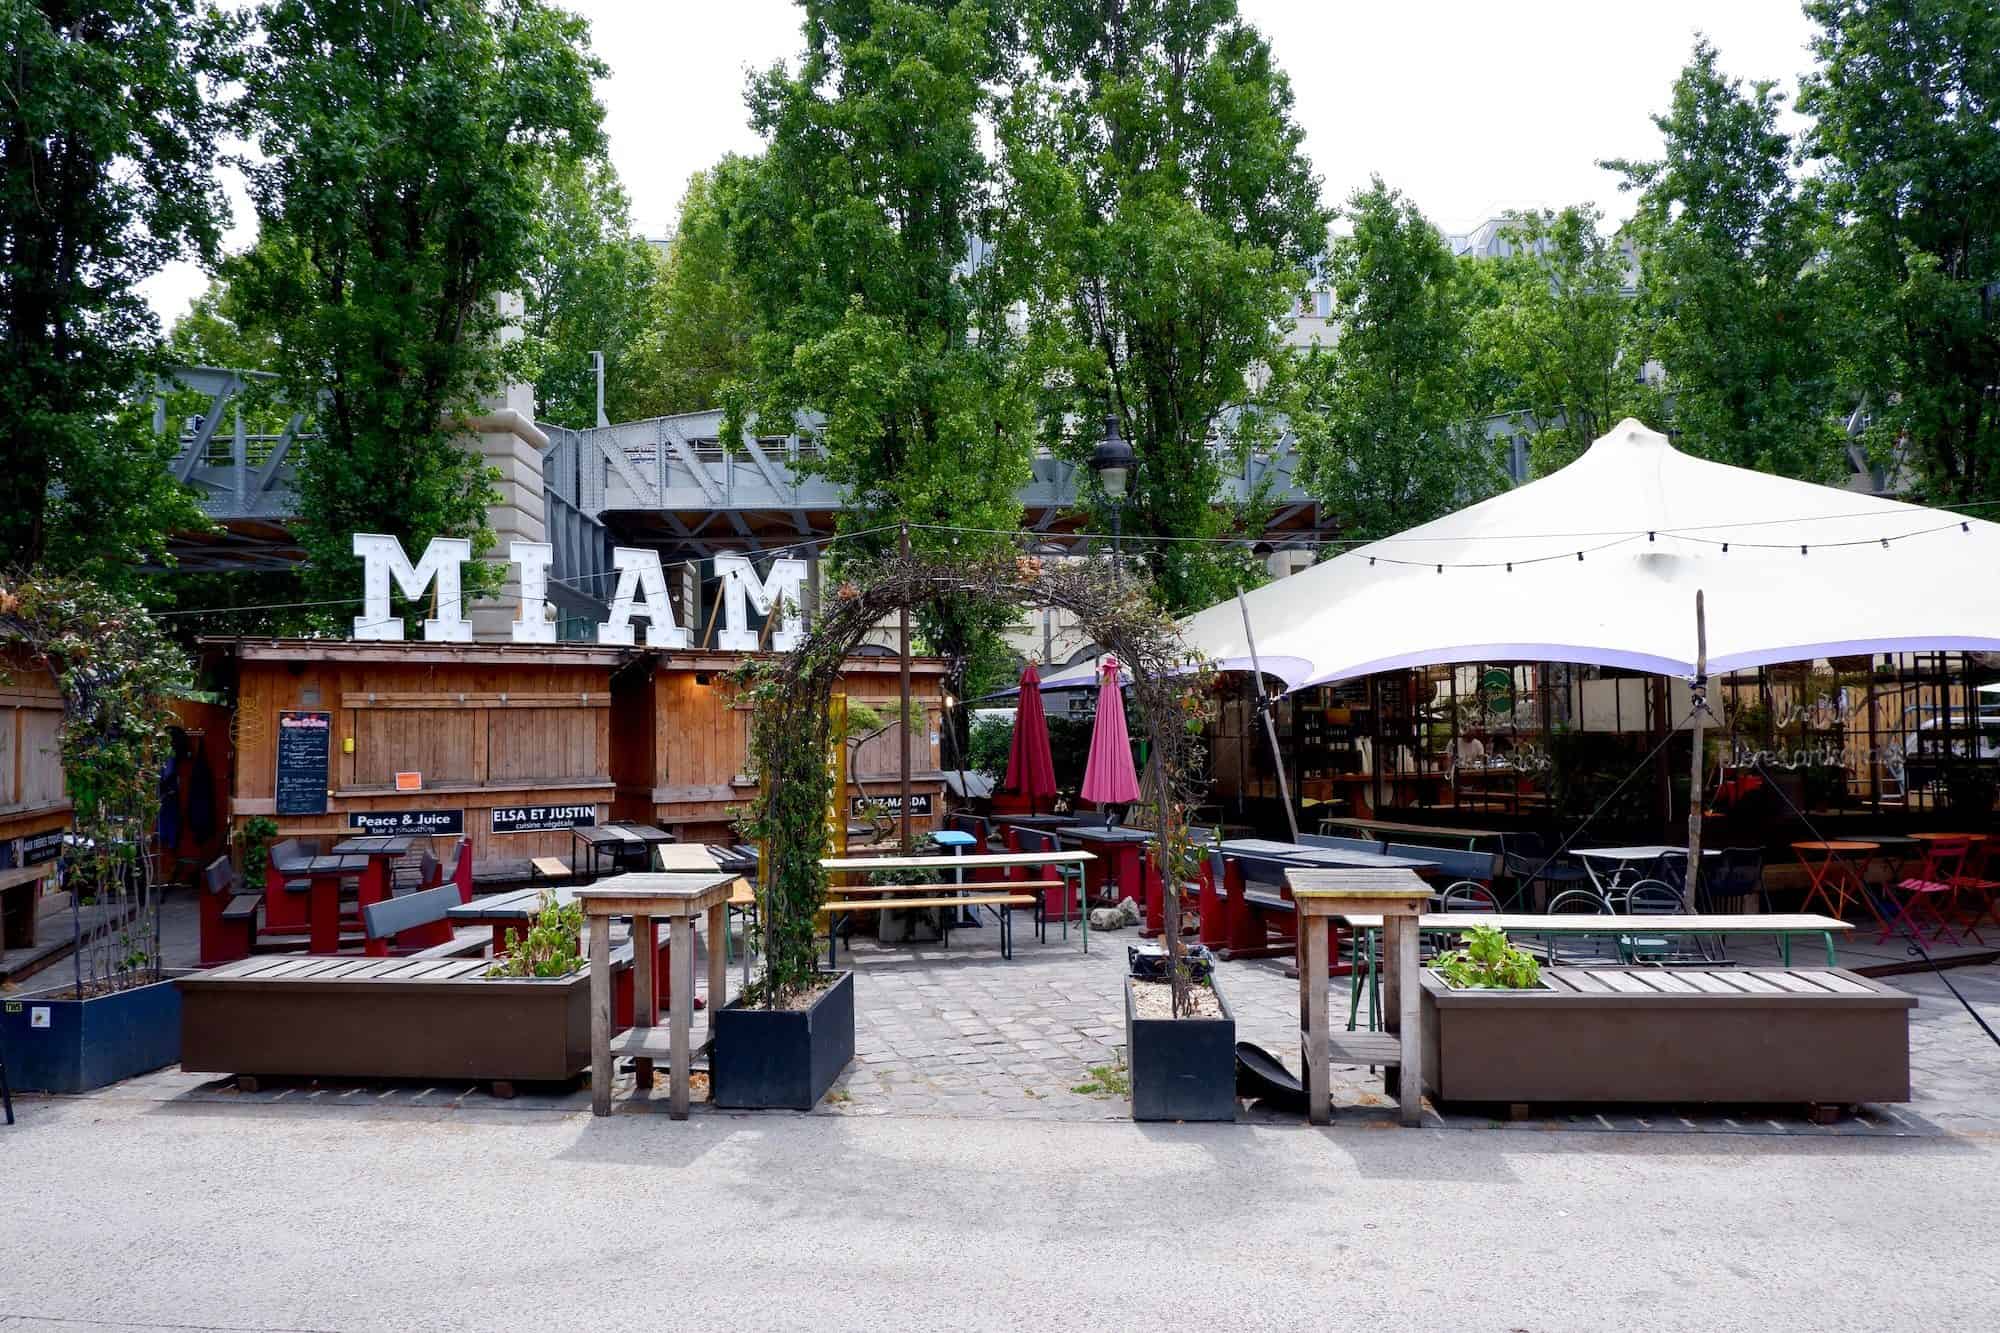 The terrace of La Rotonde Paris bar close to the canal is an urban garden with seating and parasols.